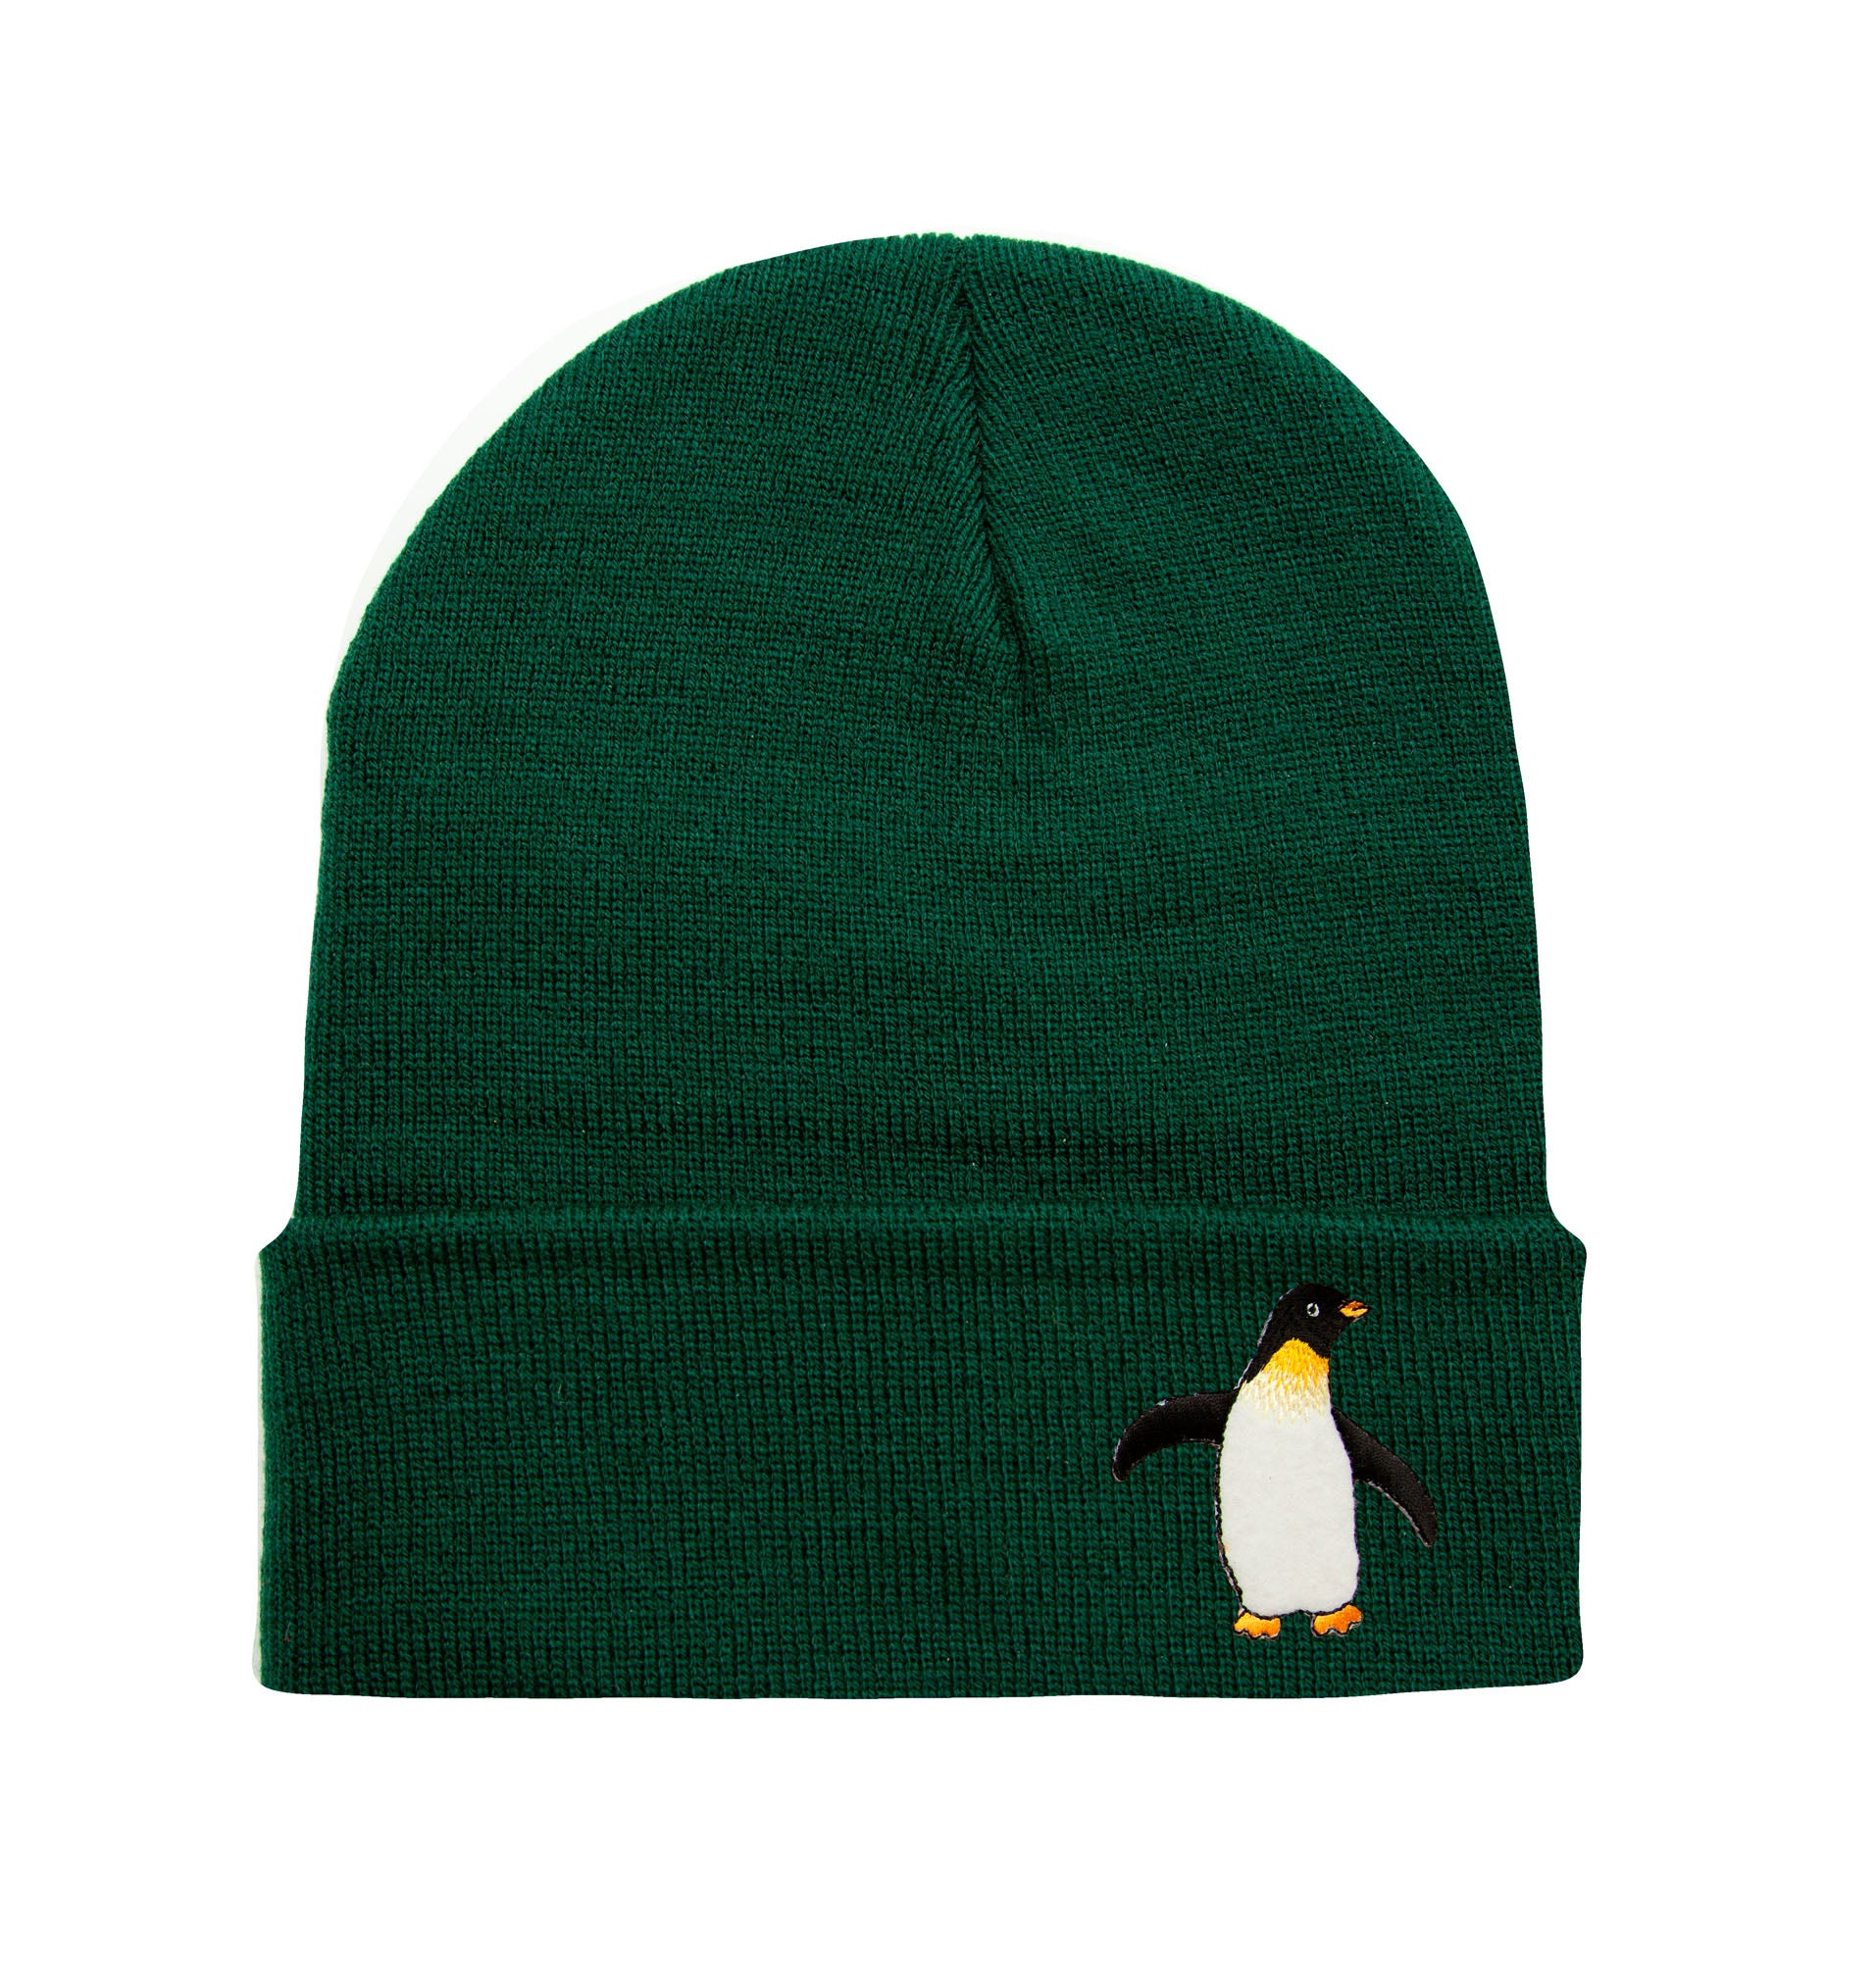 The Hat - Green